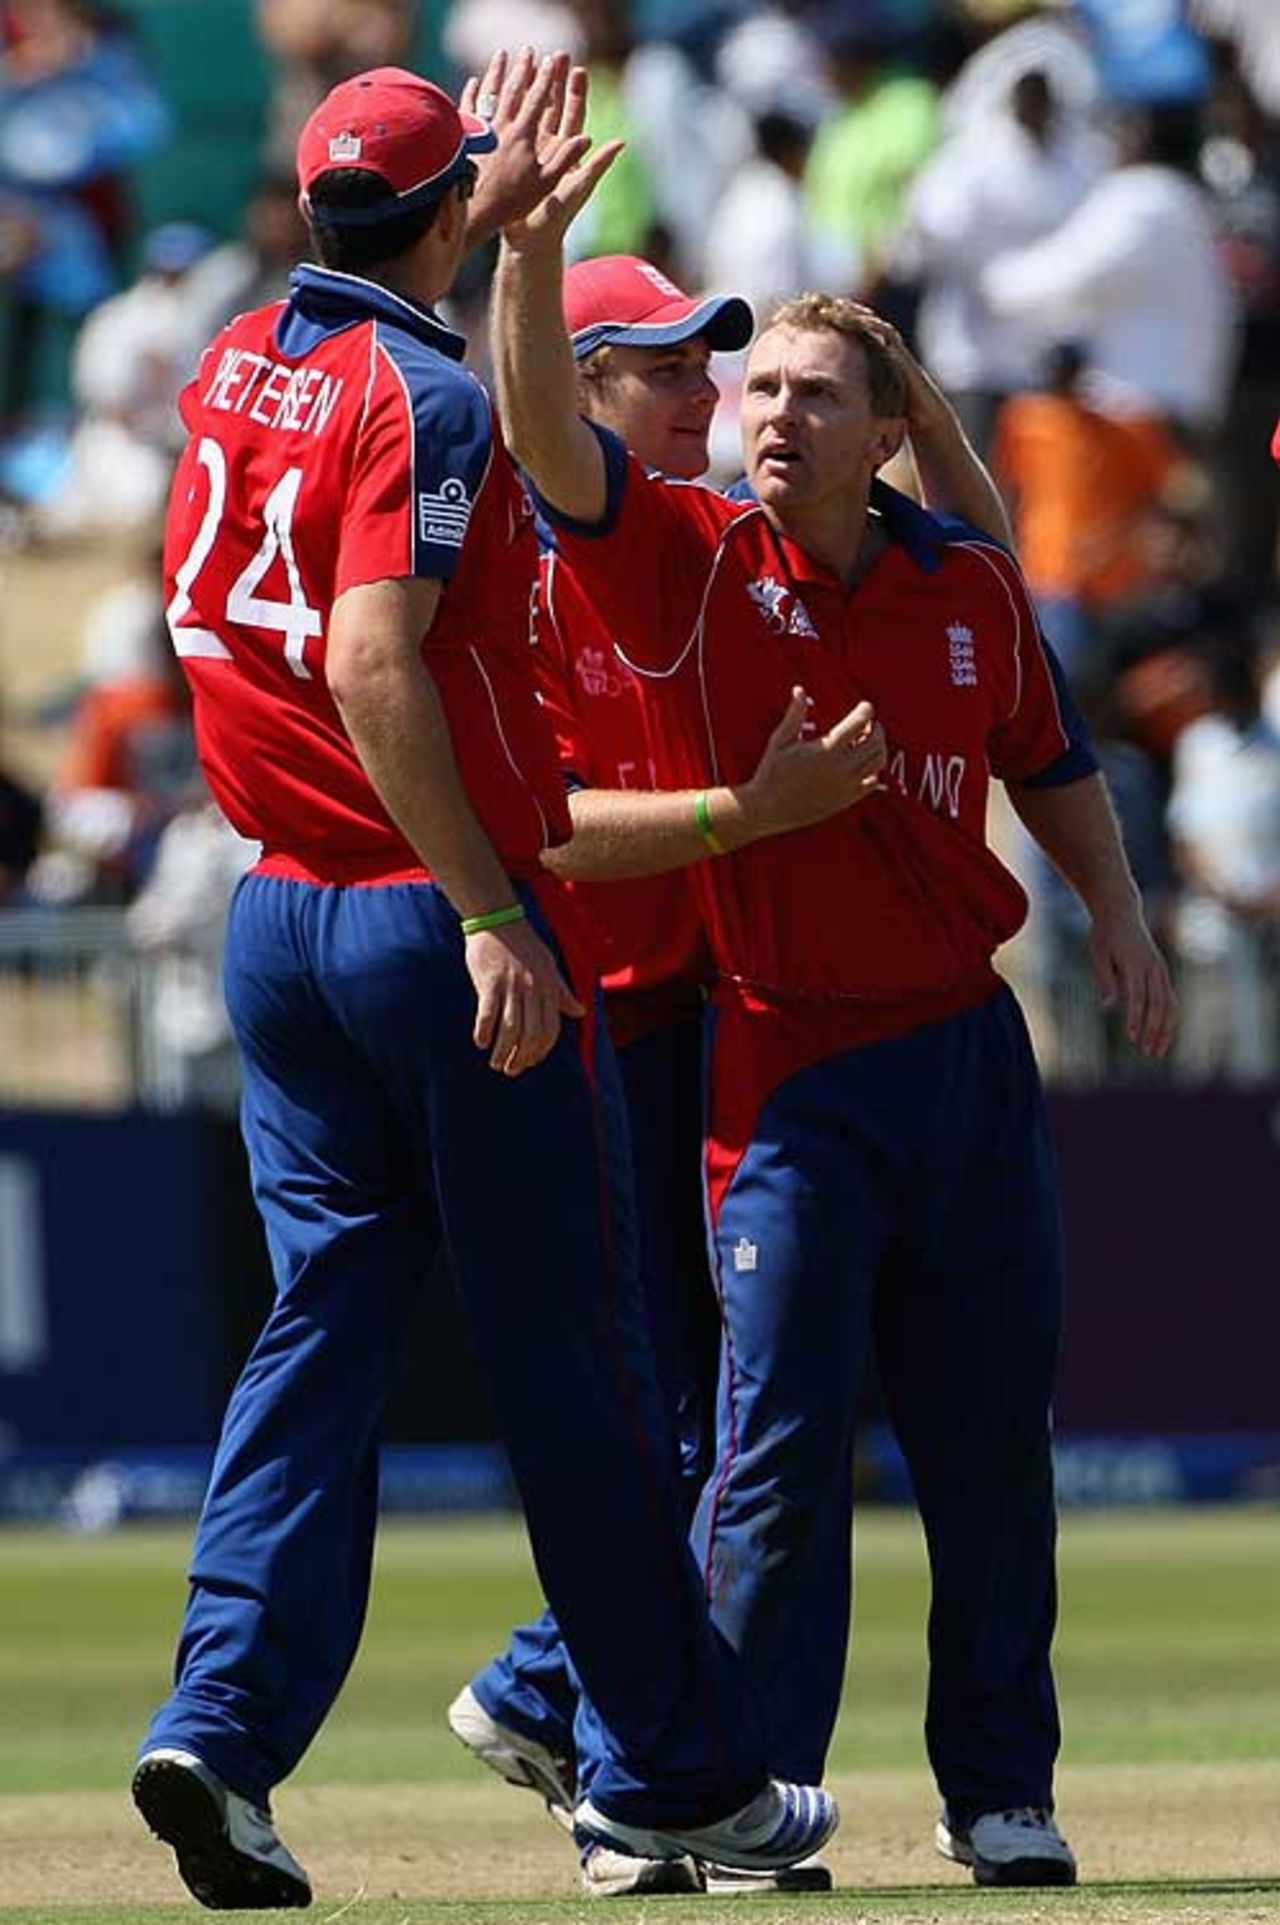 Darren Maddy claimed two wickets in his solitary over, England v New Zealand, Group E, ICC World Twenty20, Johannesburg, September 18, 2007